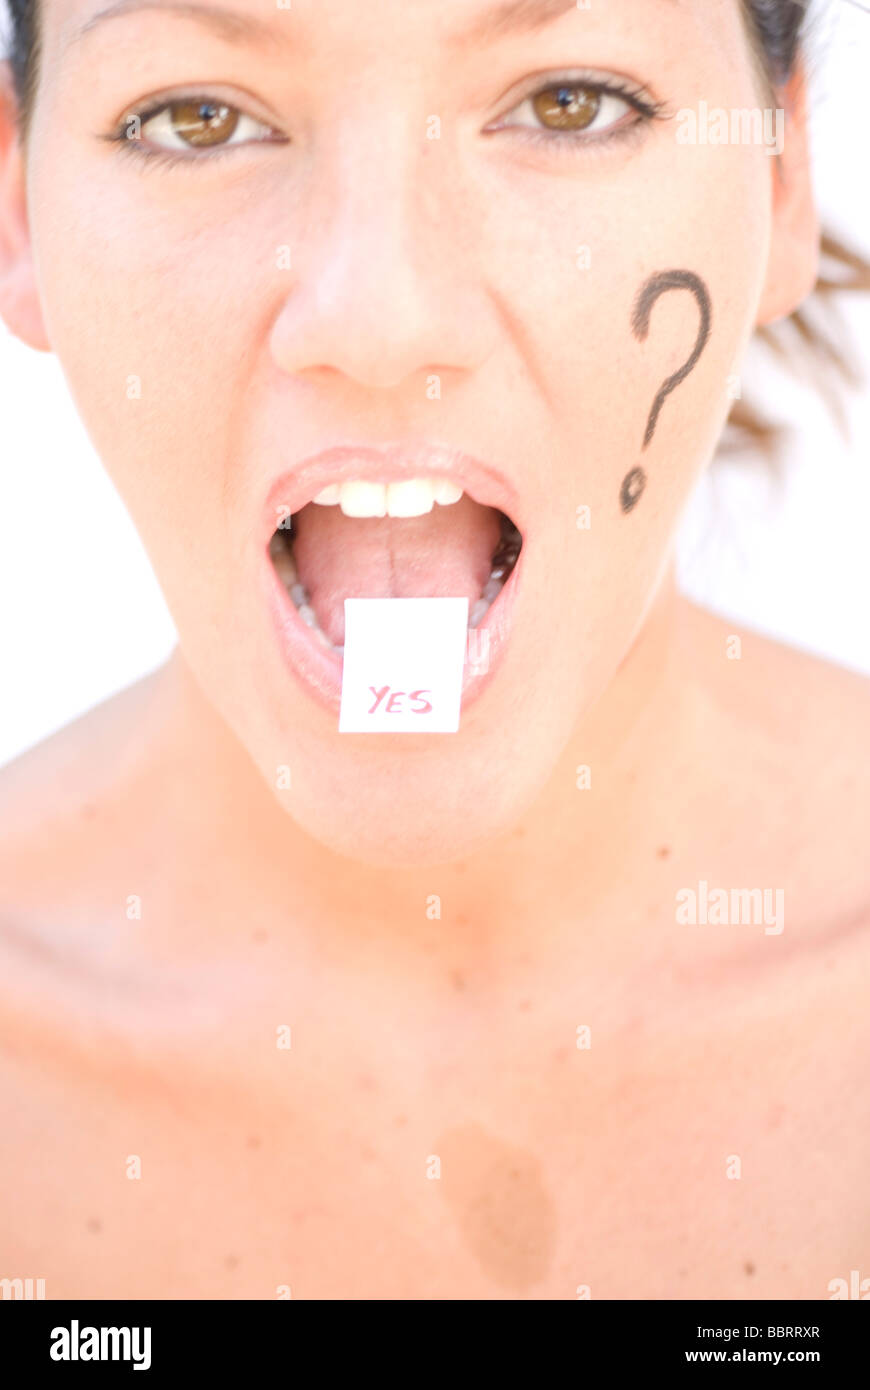 Question mark simbol painted in woman´s face and answer Yes on her tongue Stock Photo